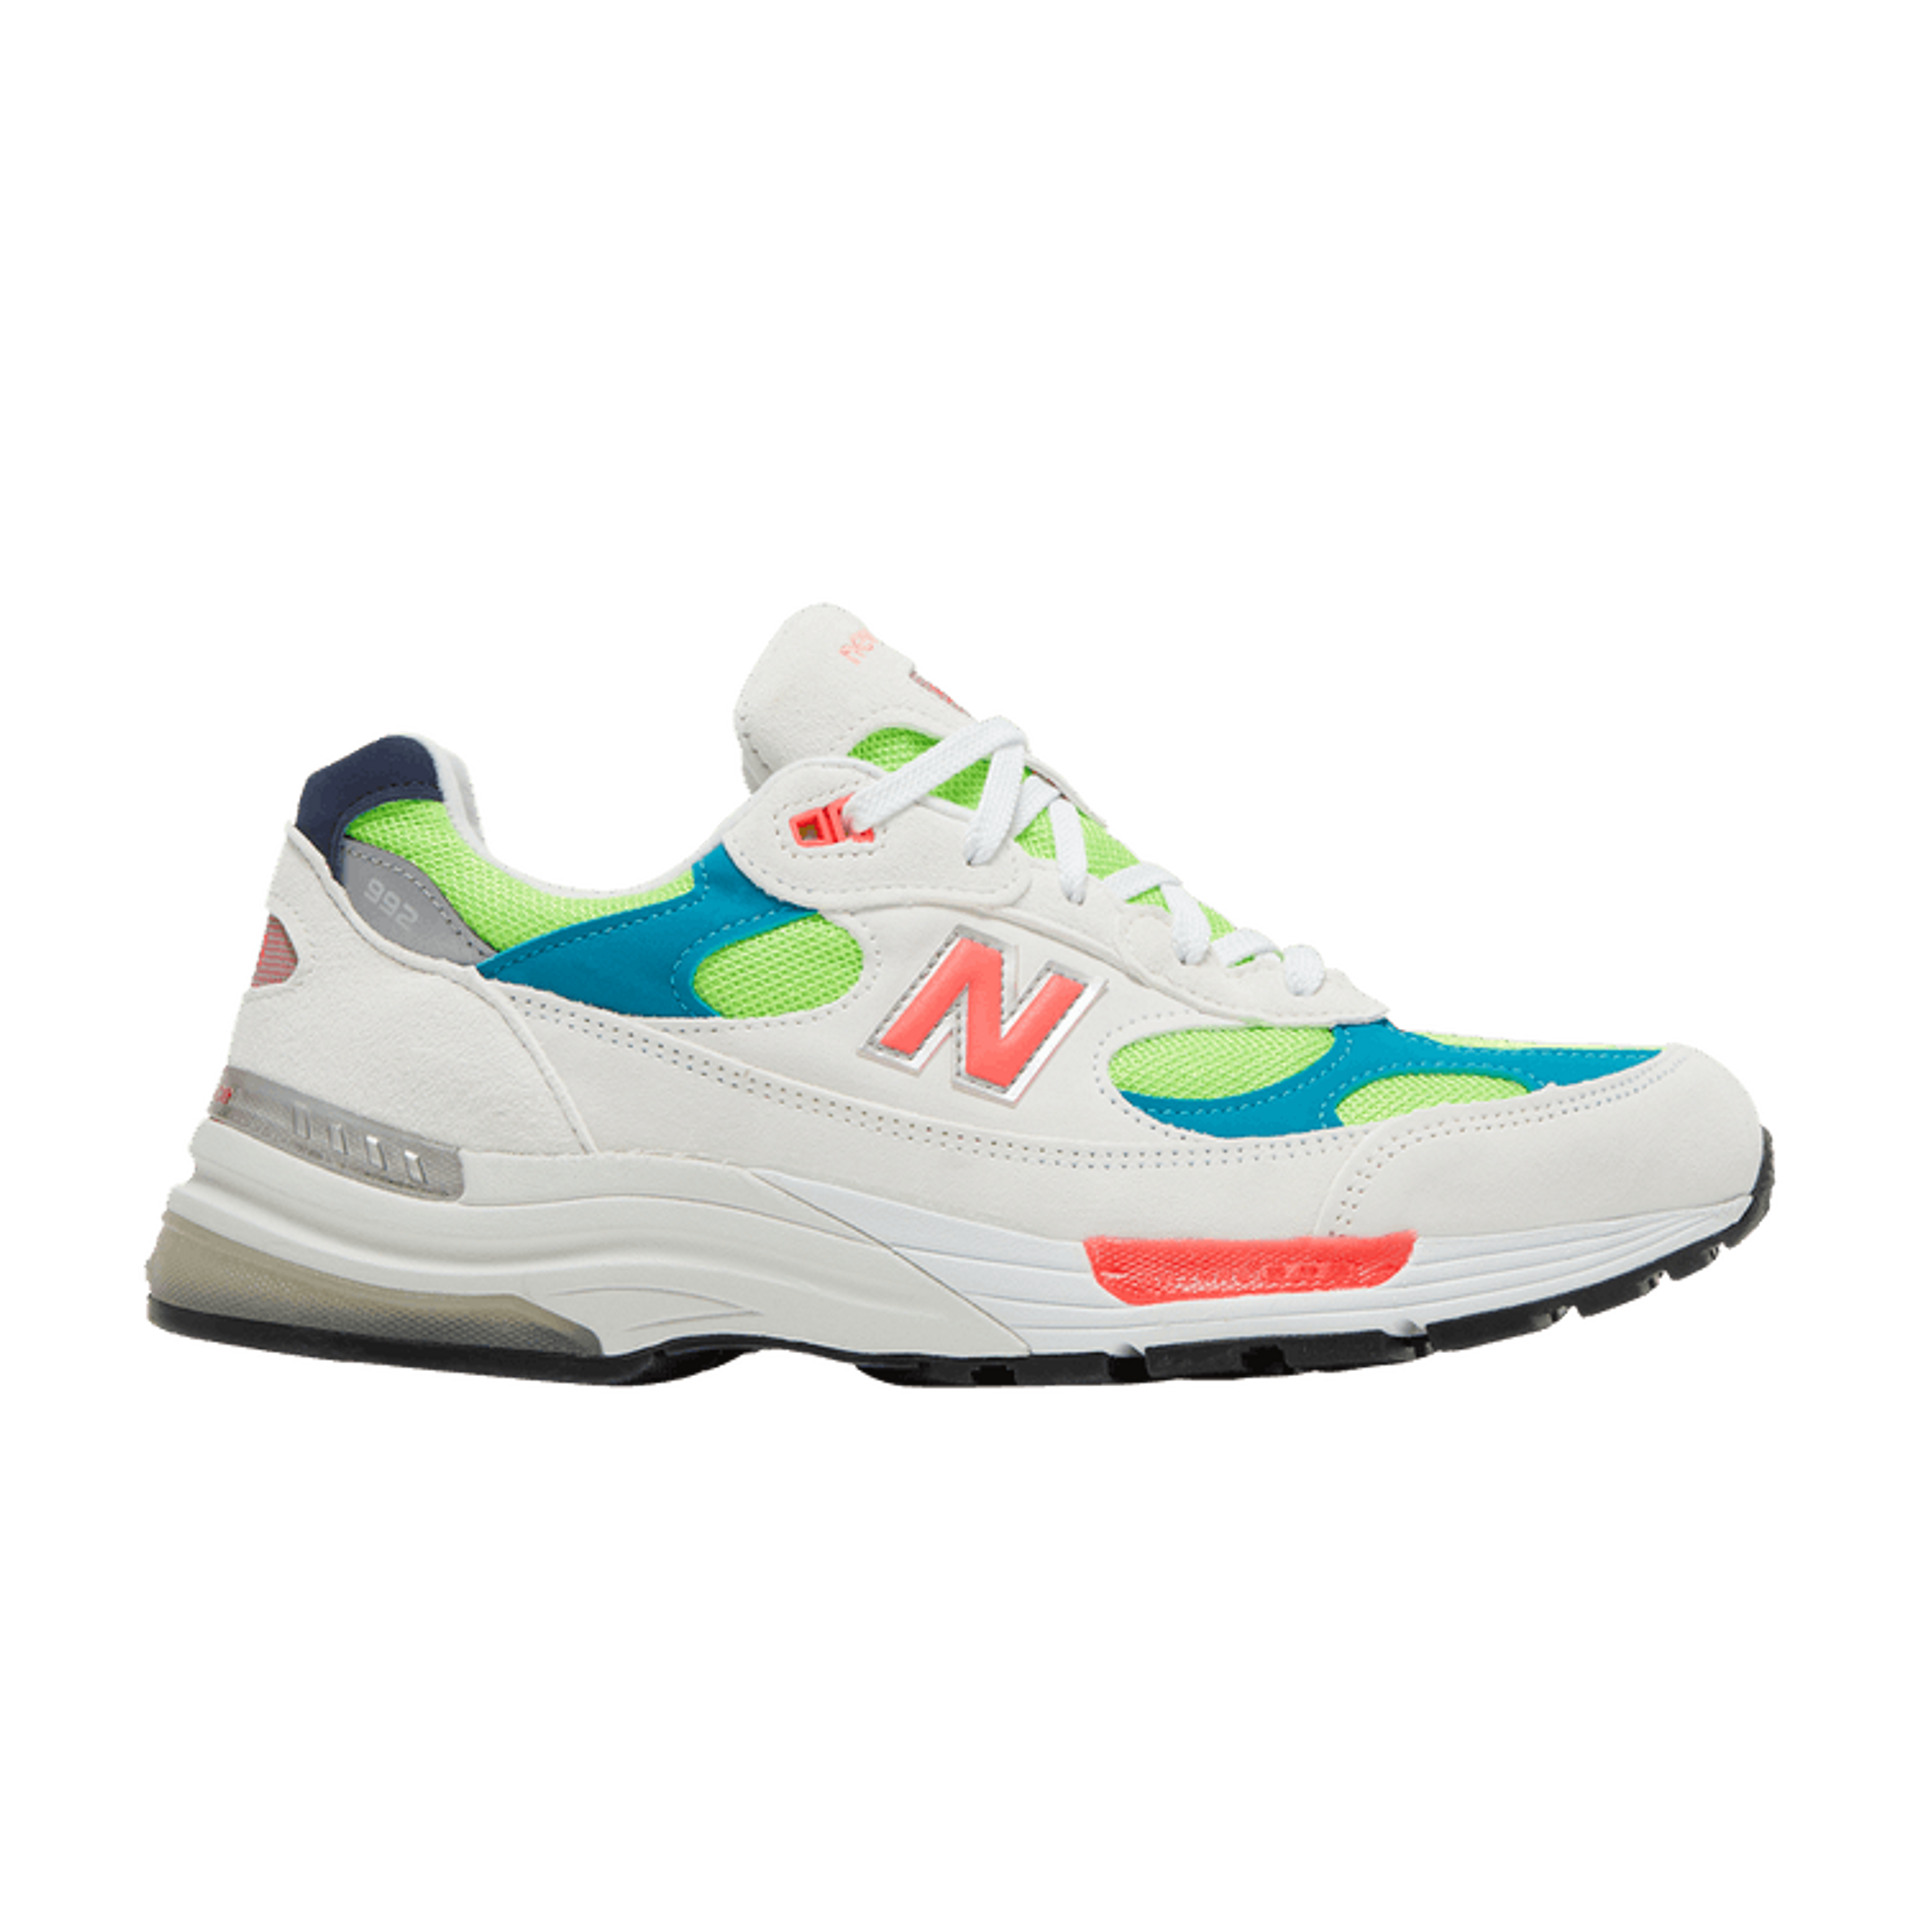 992 Made in USA 'White Neon'